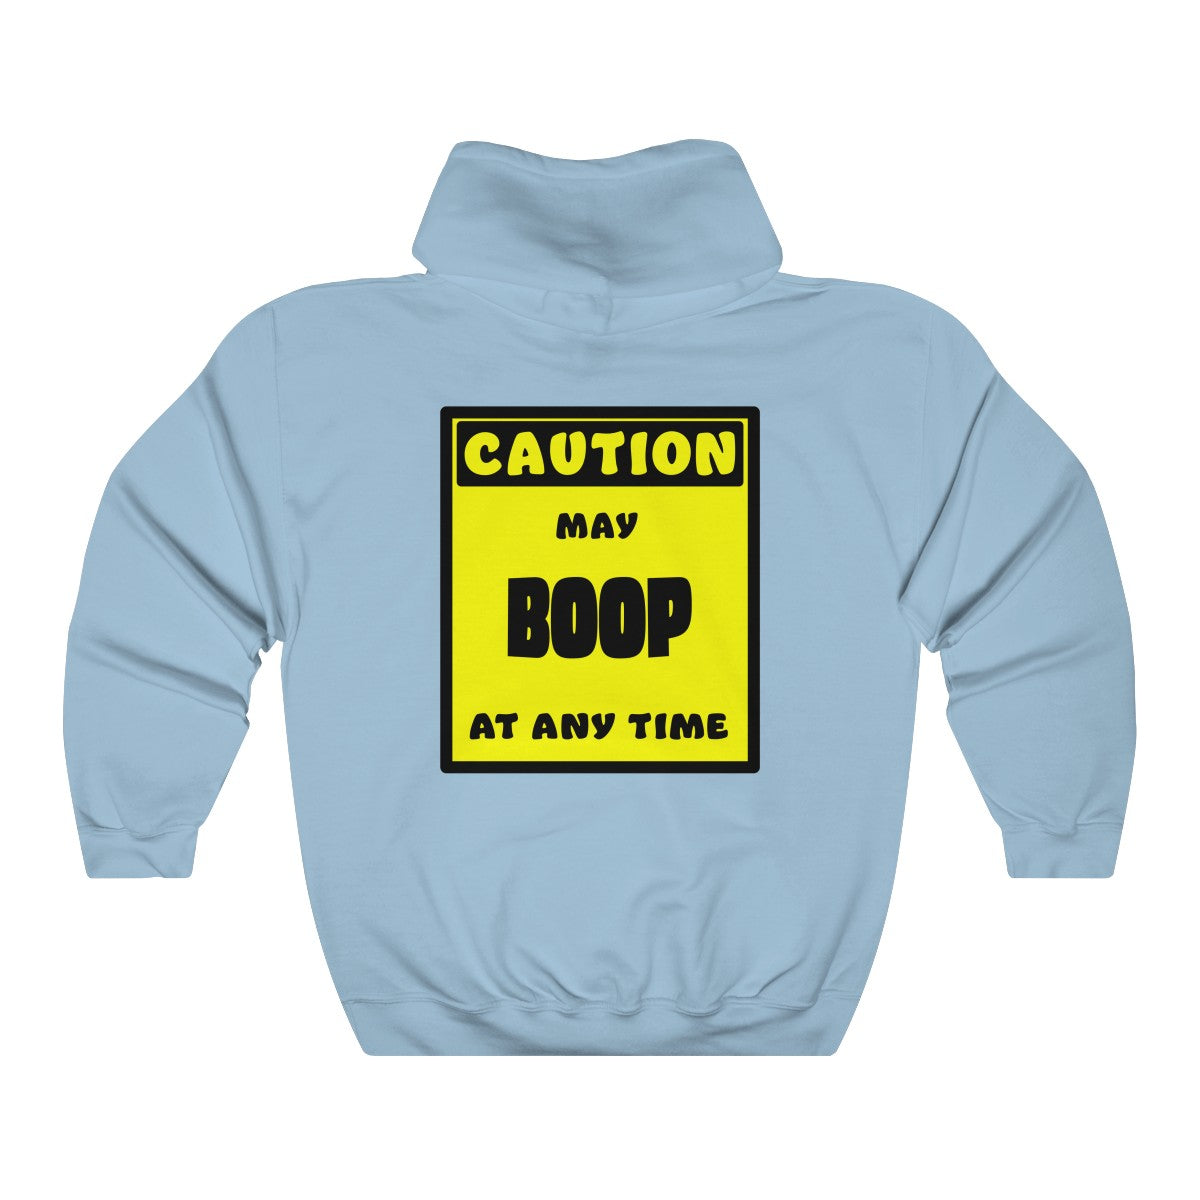 CAUTION! May BOOP at any time! - Hoodie Hoodie AFLT-Whootorca Light Blue S 